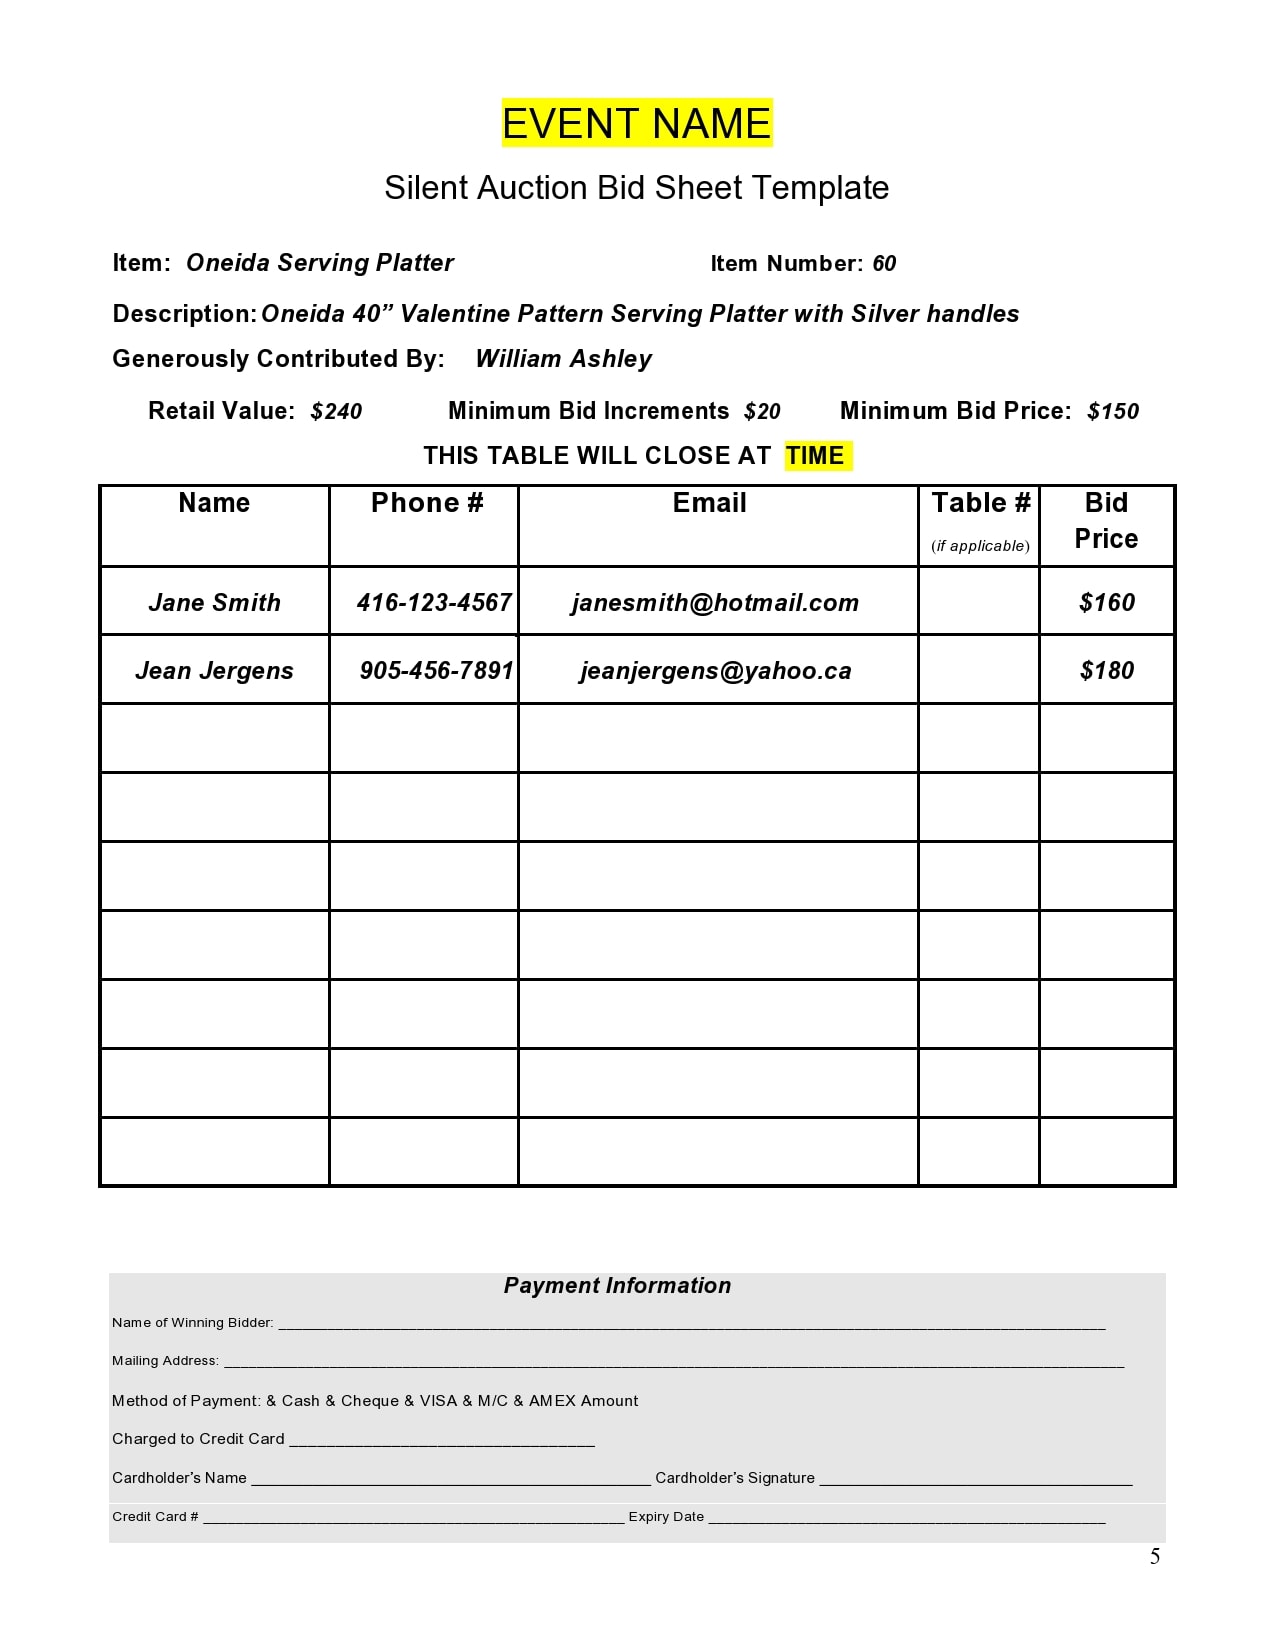 20 Silent Auction Bid Sheet Templates [Free] - TemplateArchive For Auction Bid Cards Template